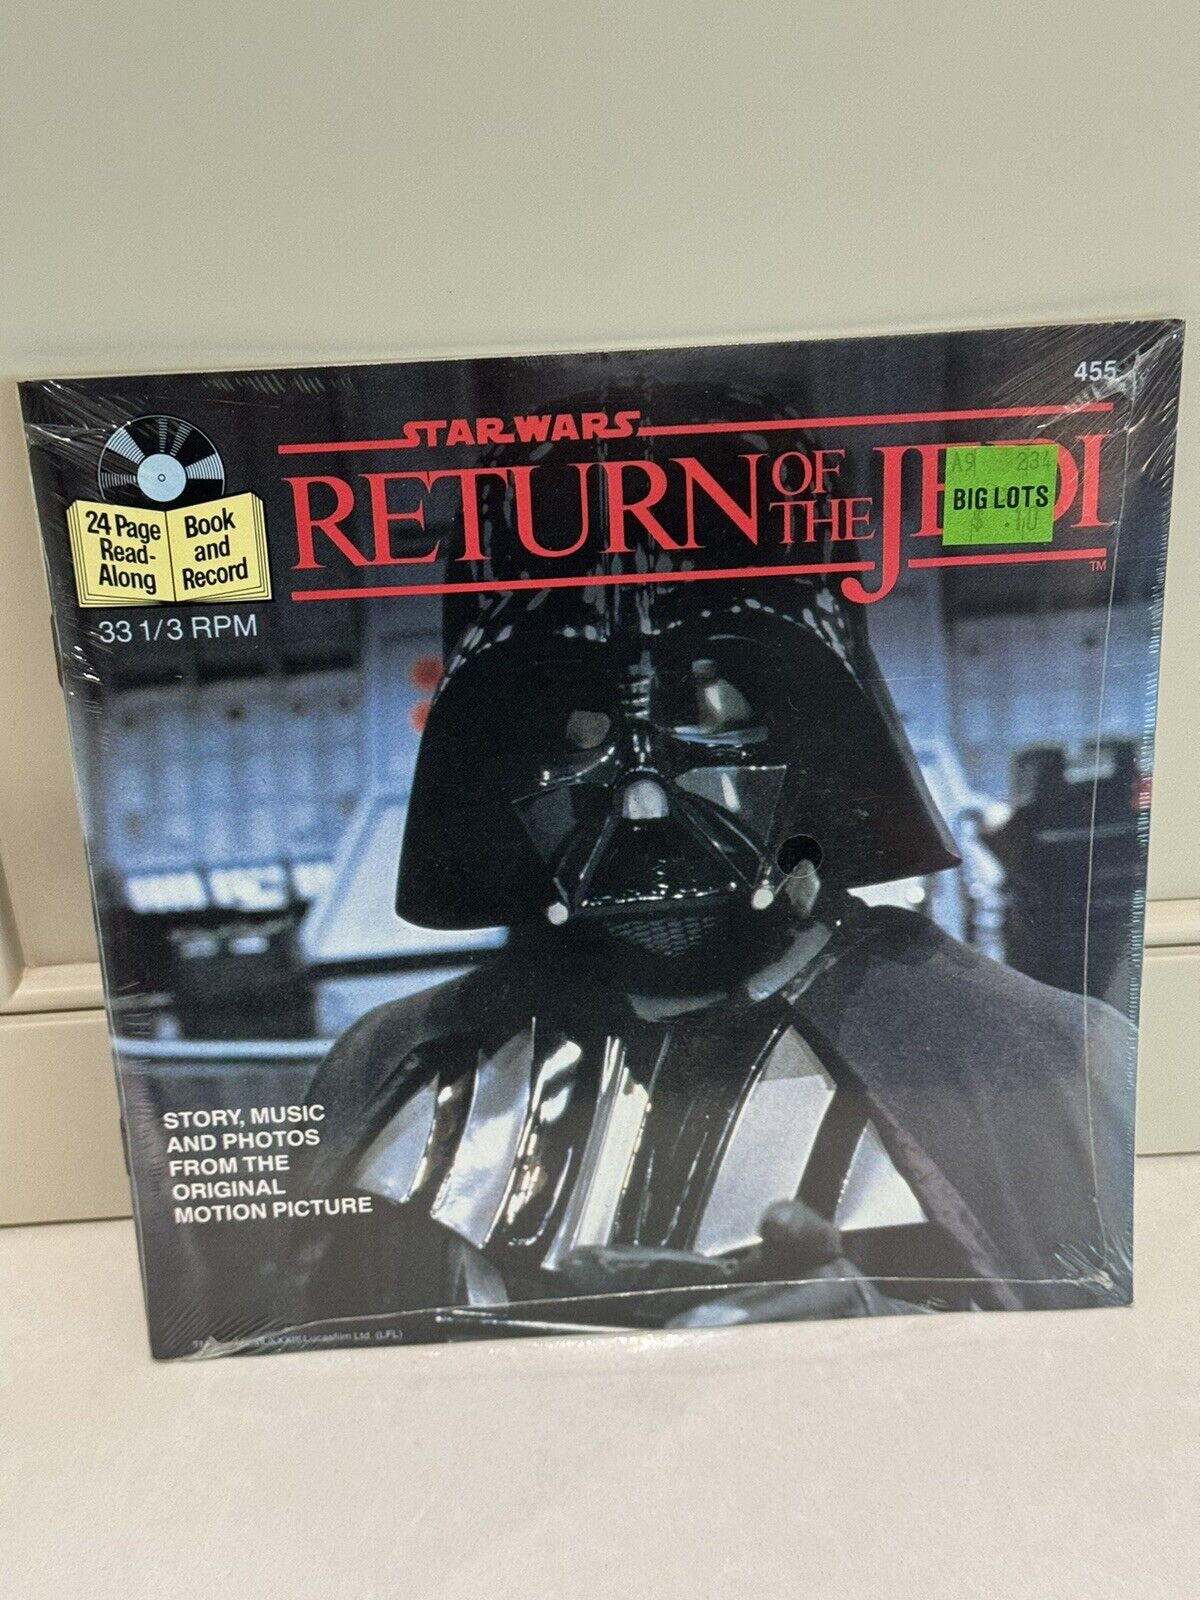 Star Wars Return of the Jedi Read-Along Book & Record Sealed NEW From 1983 Rare